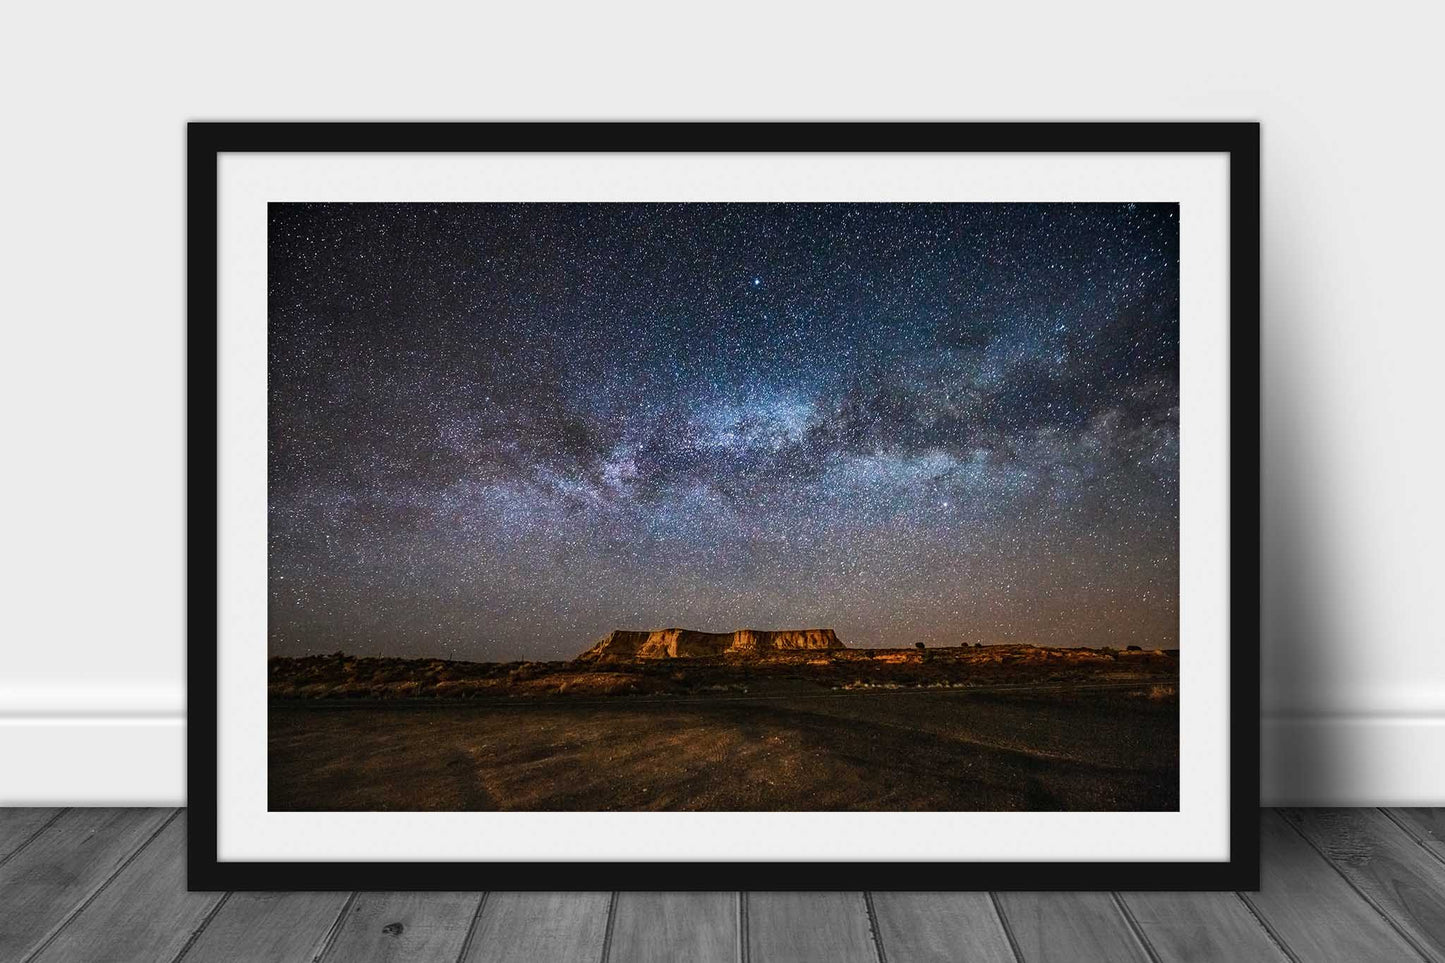 Celestial framed print with optional mat of the Milky Way spanning the horizon over a mesa in a starry night sky in the Arizona desert by Sean Ramsey of Southern Plains Photography.